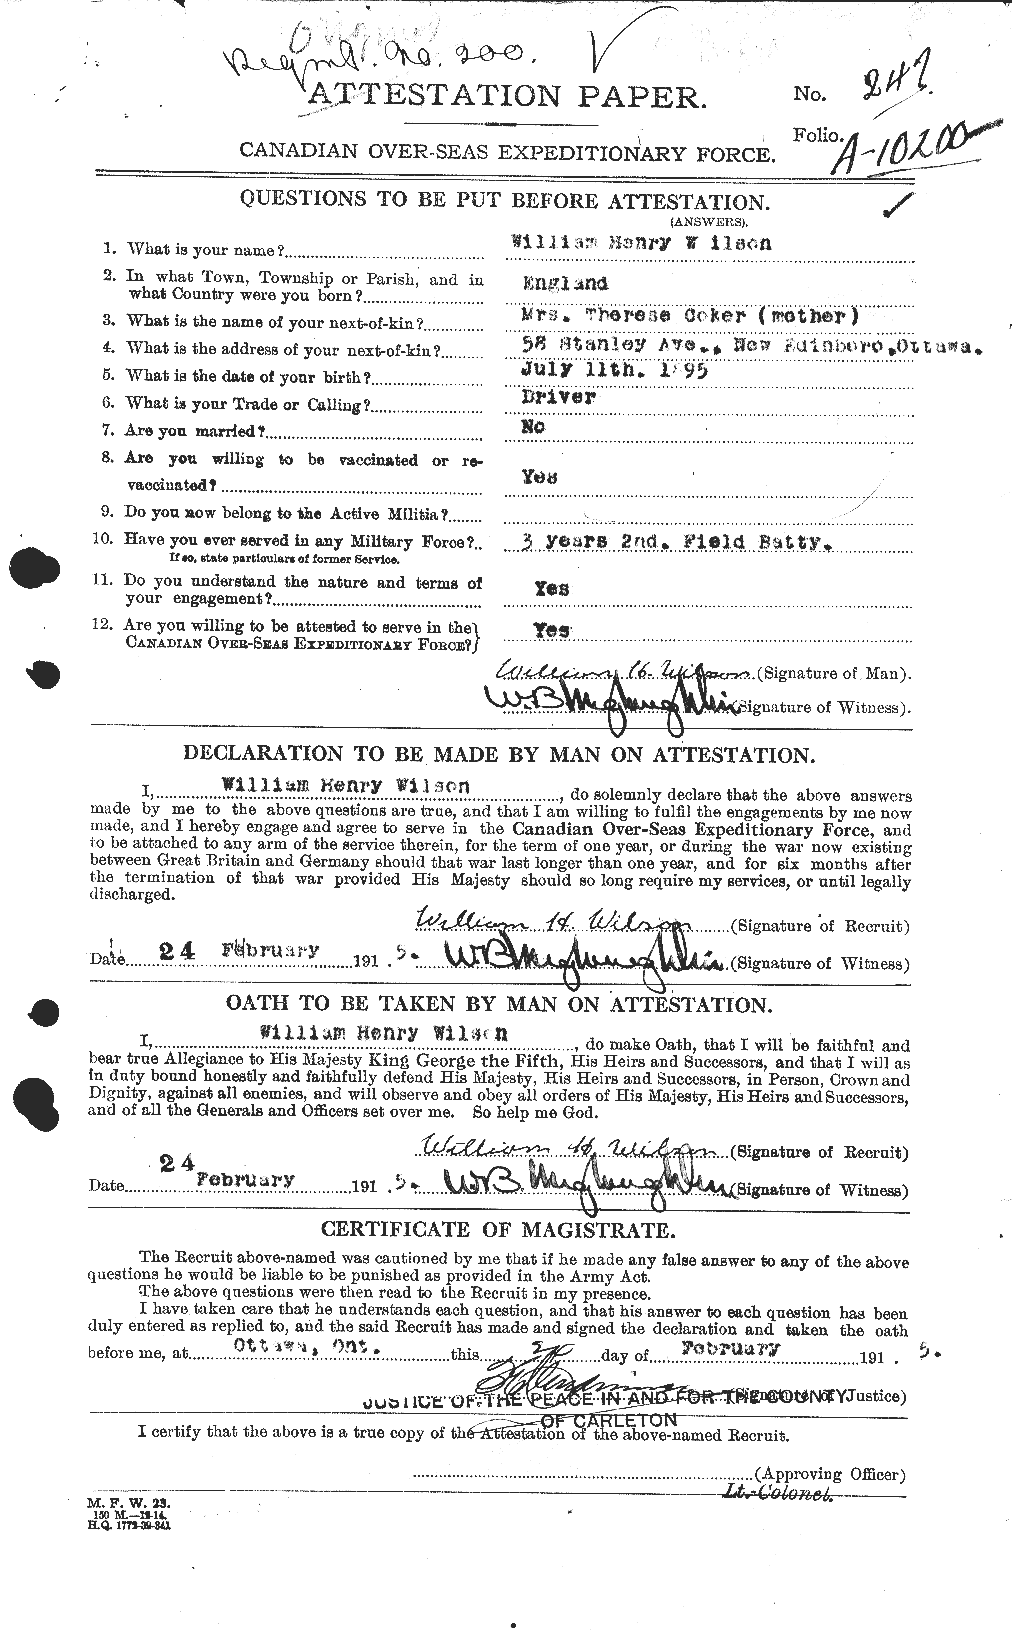 Personnel Records of the First World War - CEF 682024a